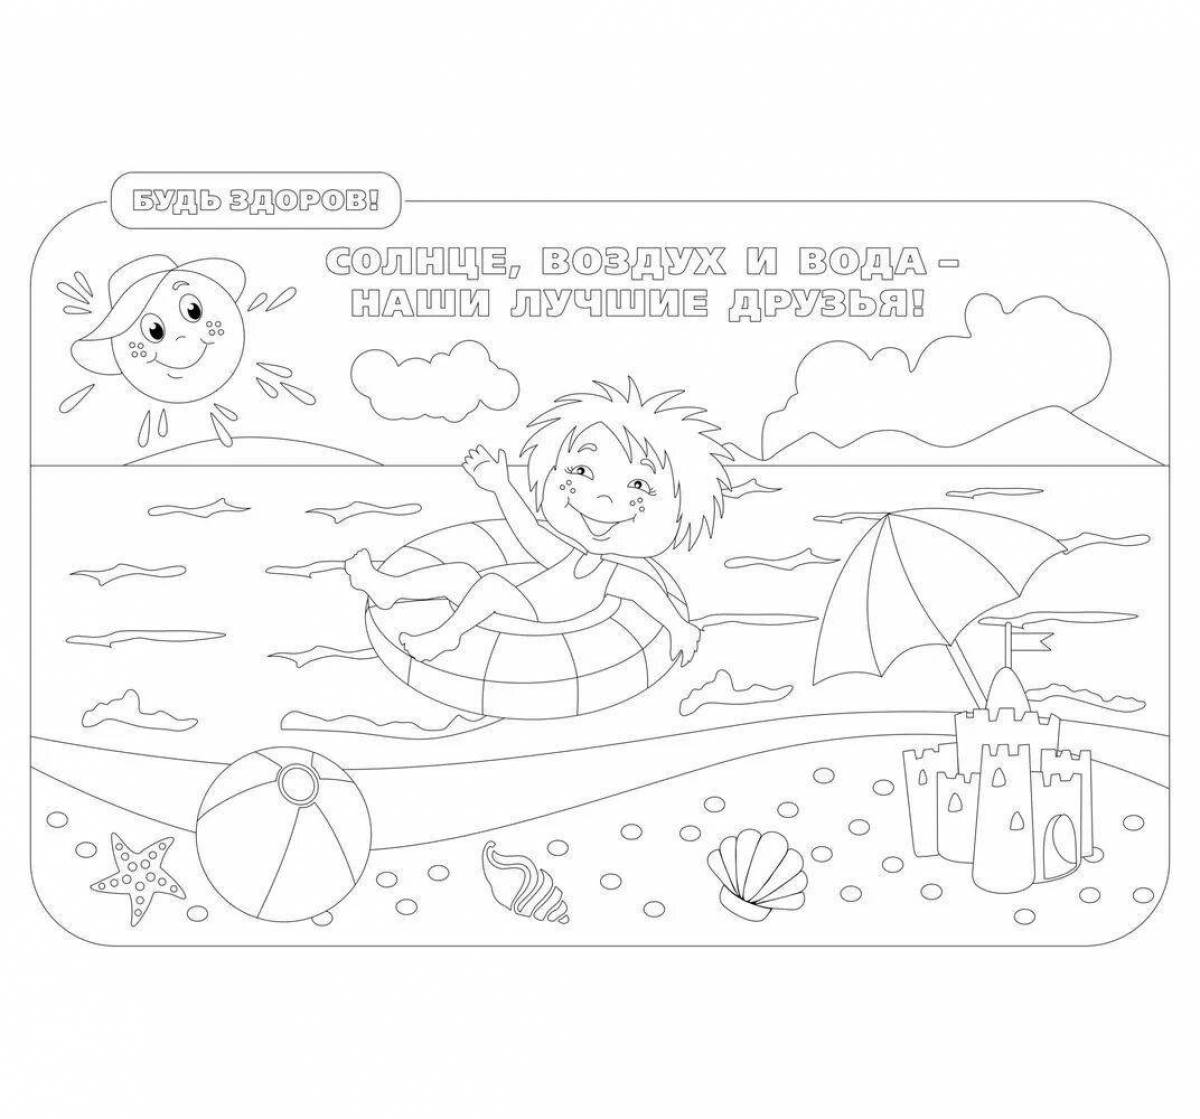 Educational health coloring book for kids